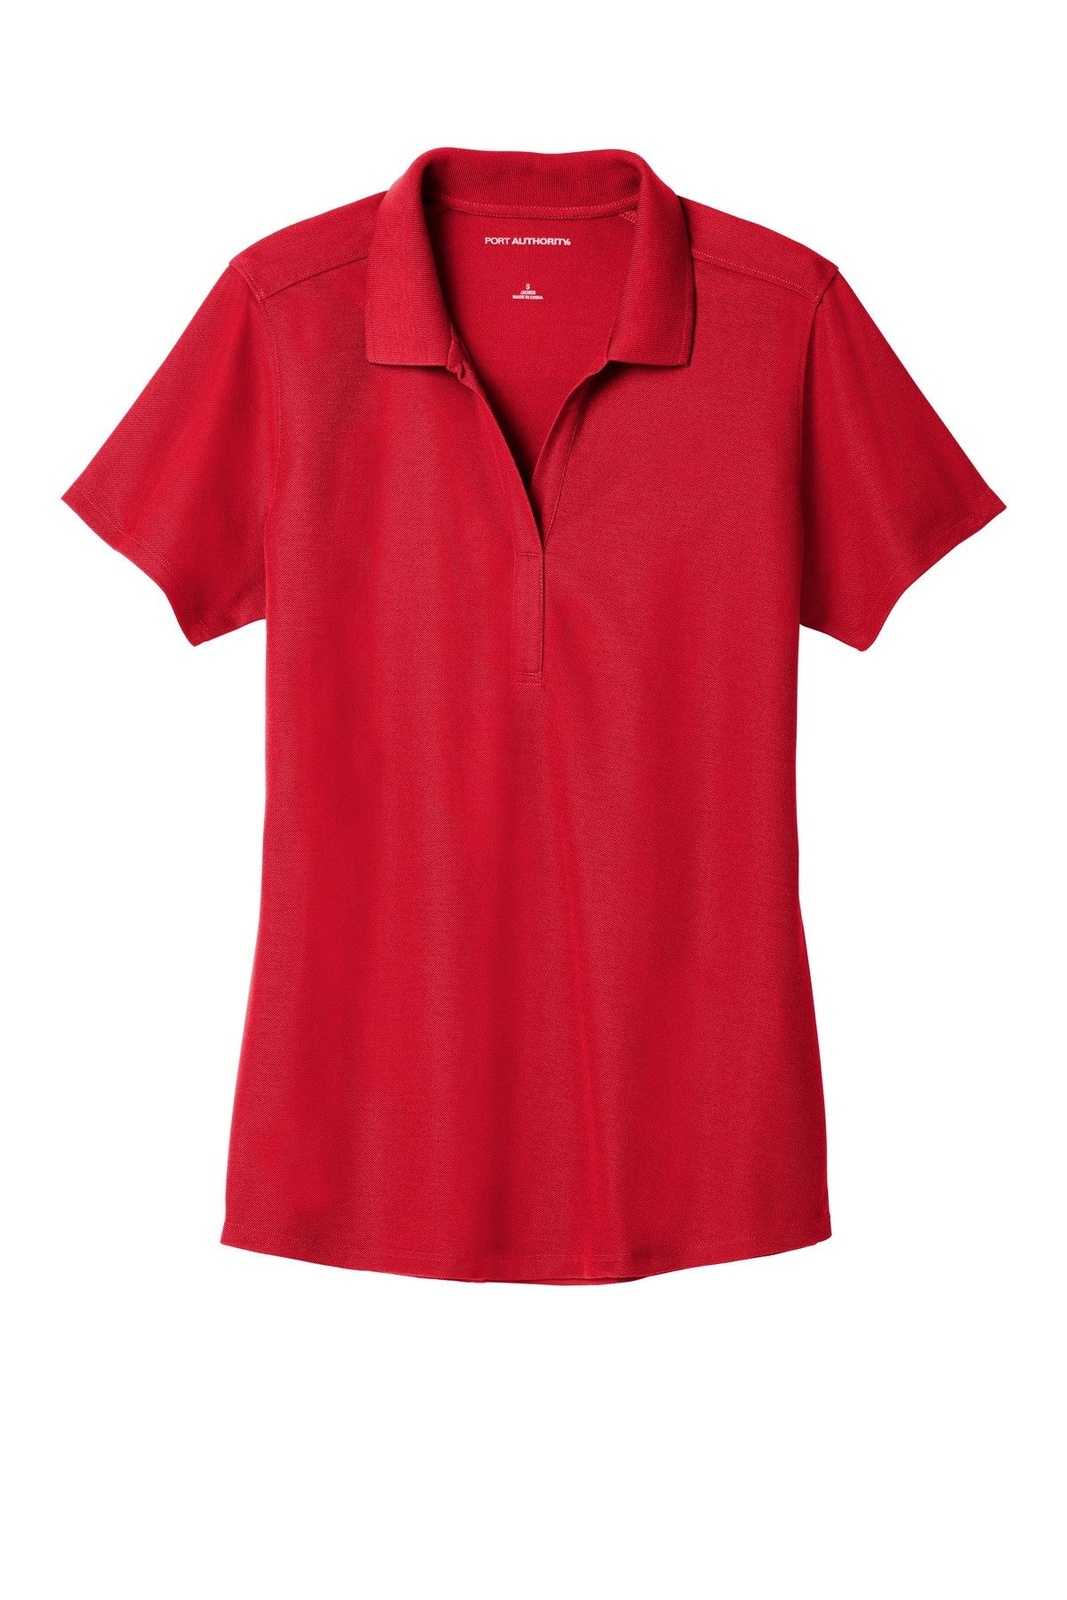 Port Authority LK600 Ladies Ezperformance Pique Polo - Apple Red - HIT a Double - 5